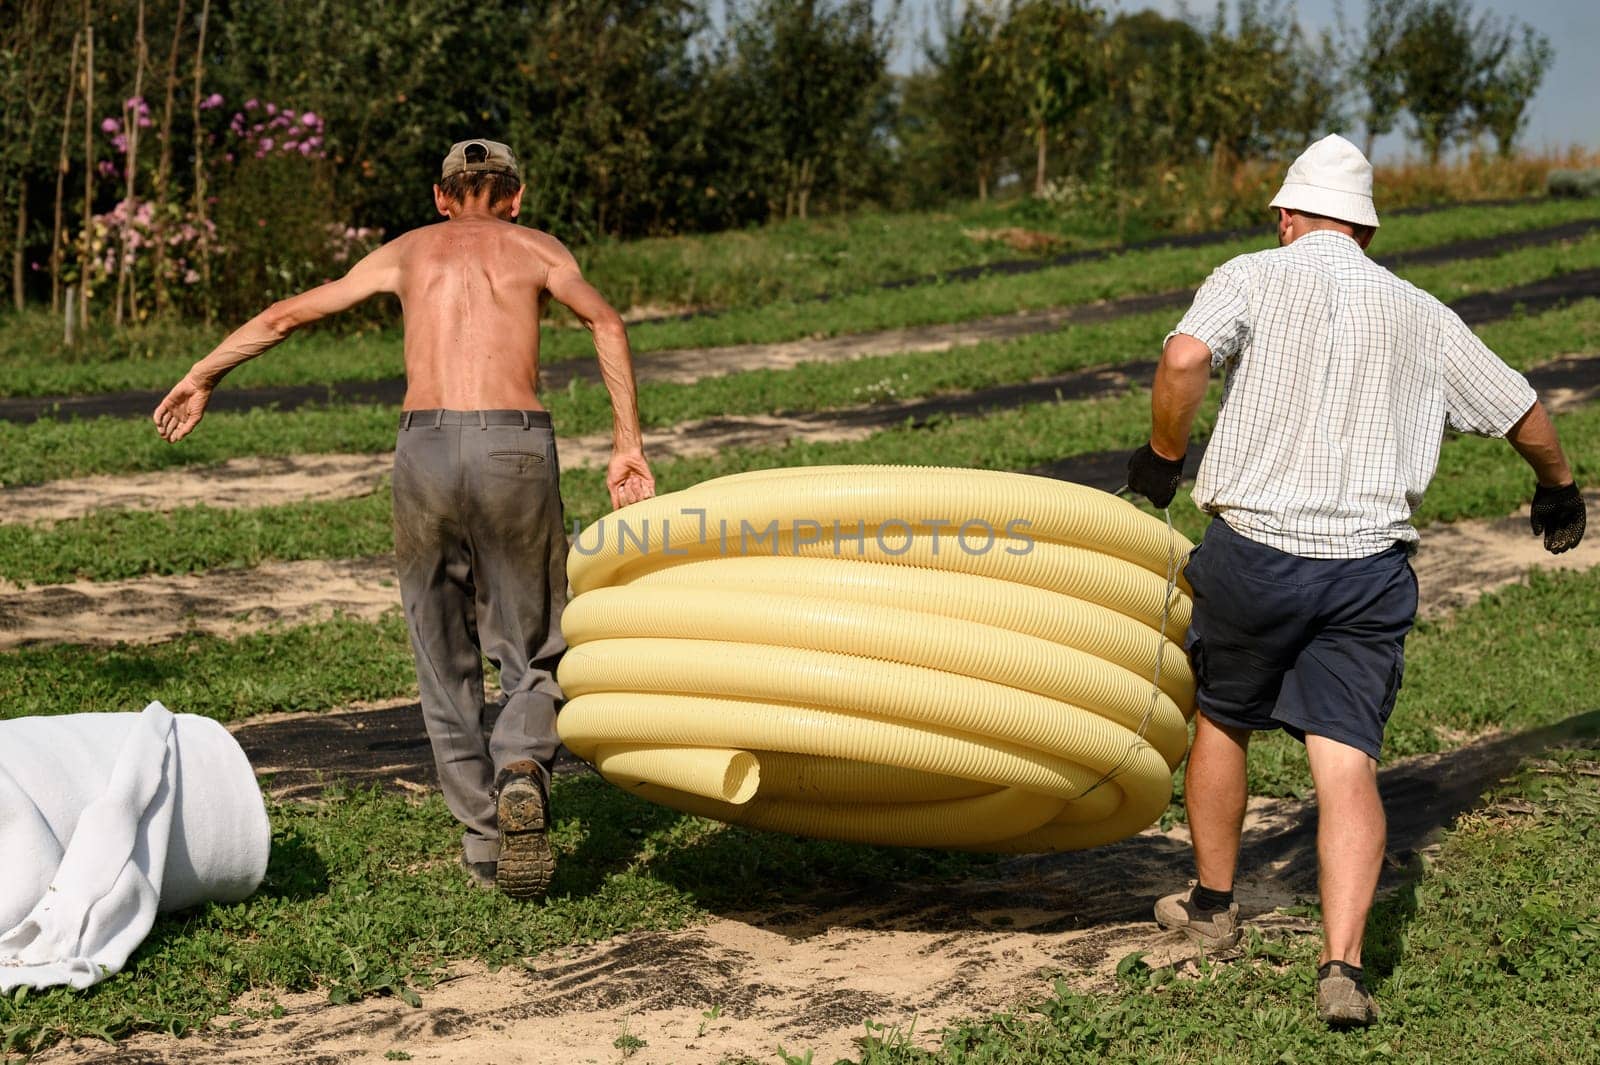 Workers carry a roll of yellow drainage pipe in their hands. Preparation for drainage works and removal of groundwater.